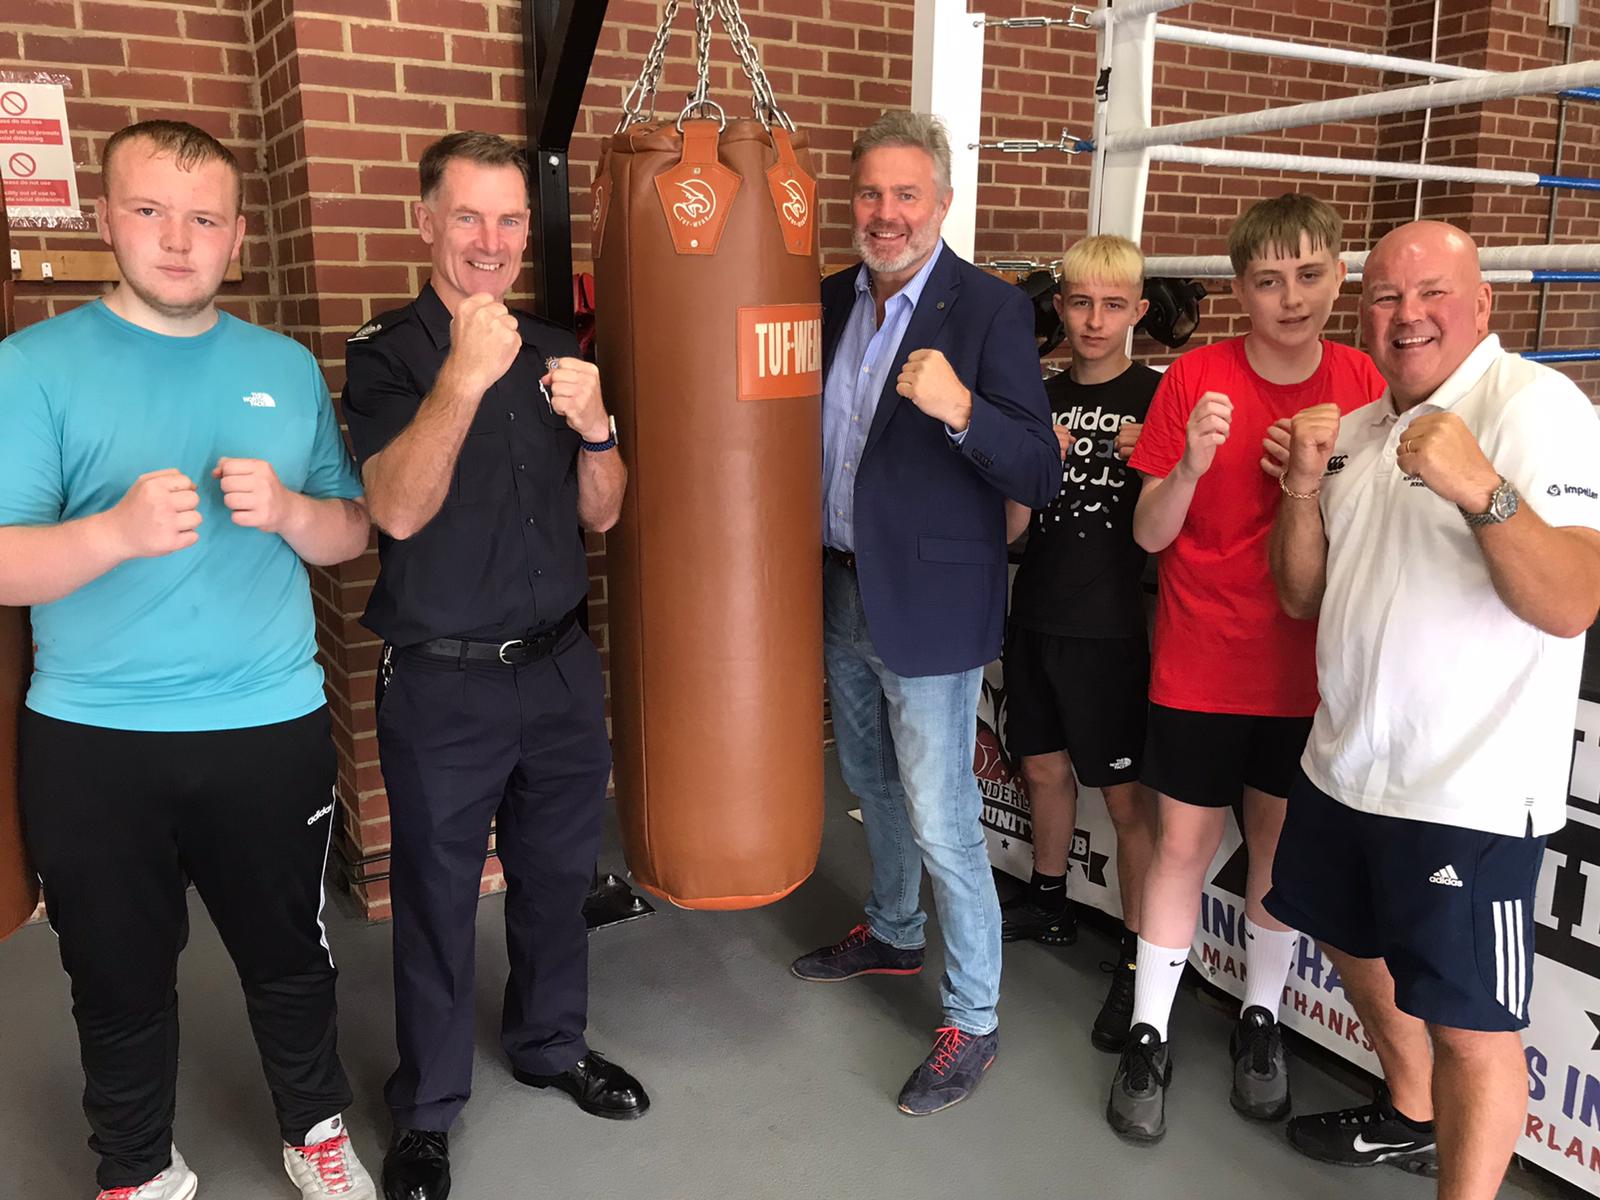 Logan Stone (young boxer), Richie Rickaby – Area Manager Community Safety (TWFRS), Glenn McCrory, Callum Hughes (young boxer), Josh Dickinson (young boxer) and Preston Brown (Head Coach and Firefighter) pictured inside the Sunderland Community Hub.